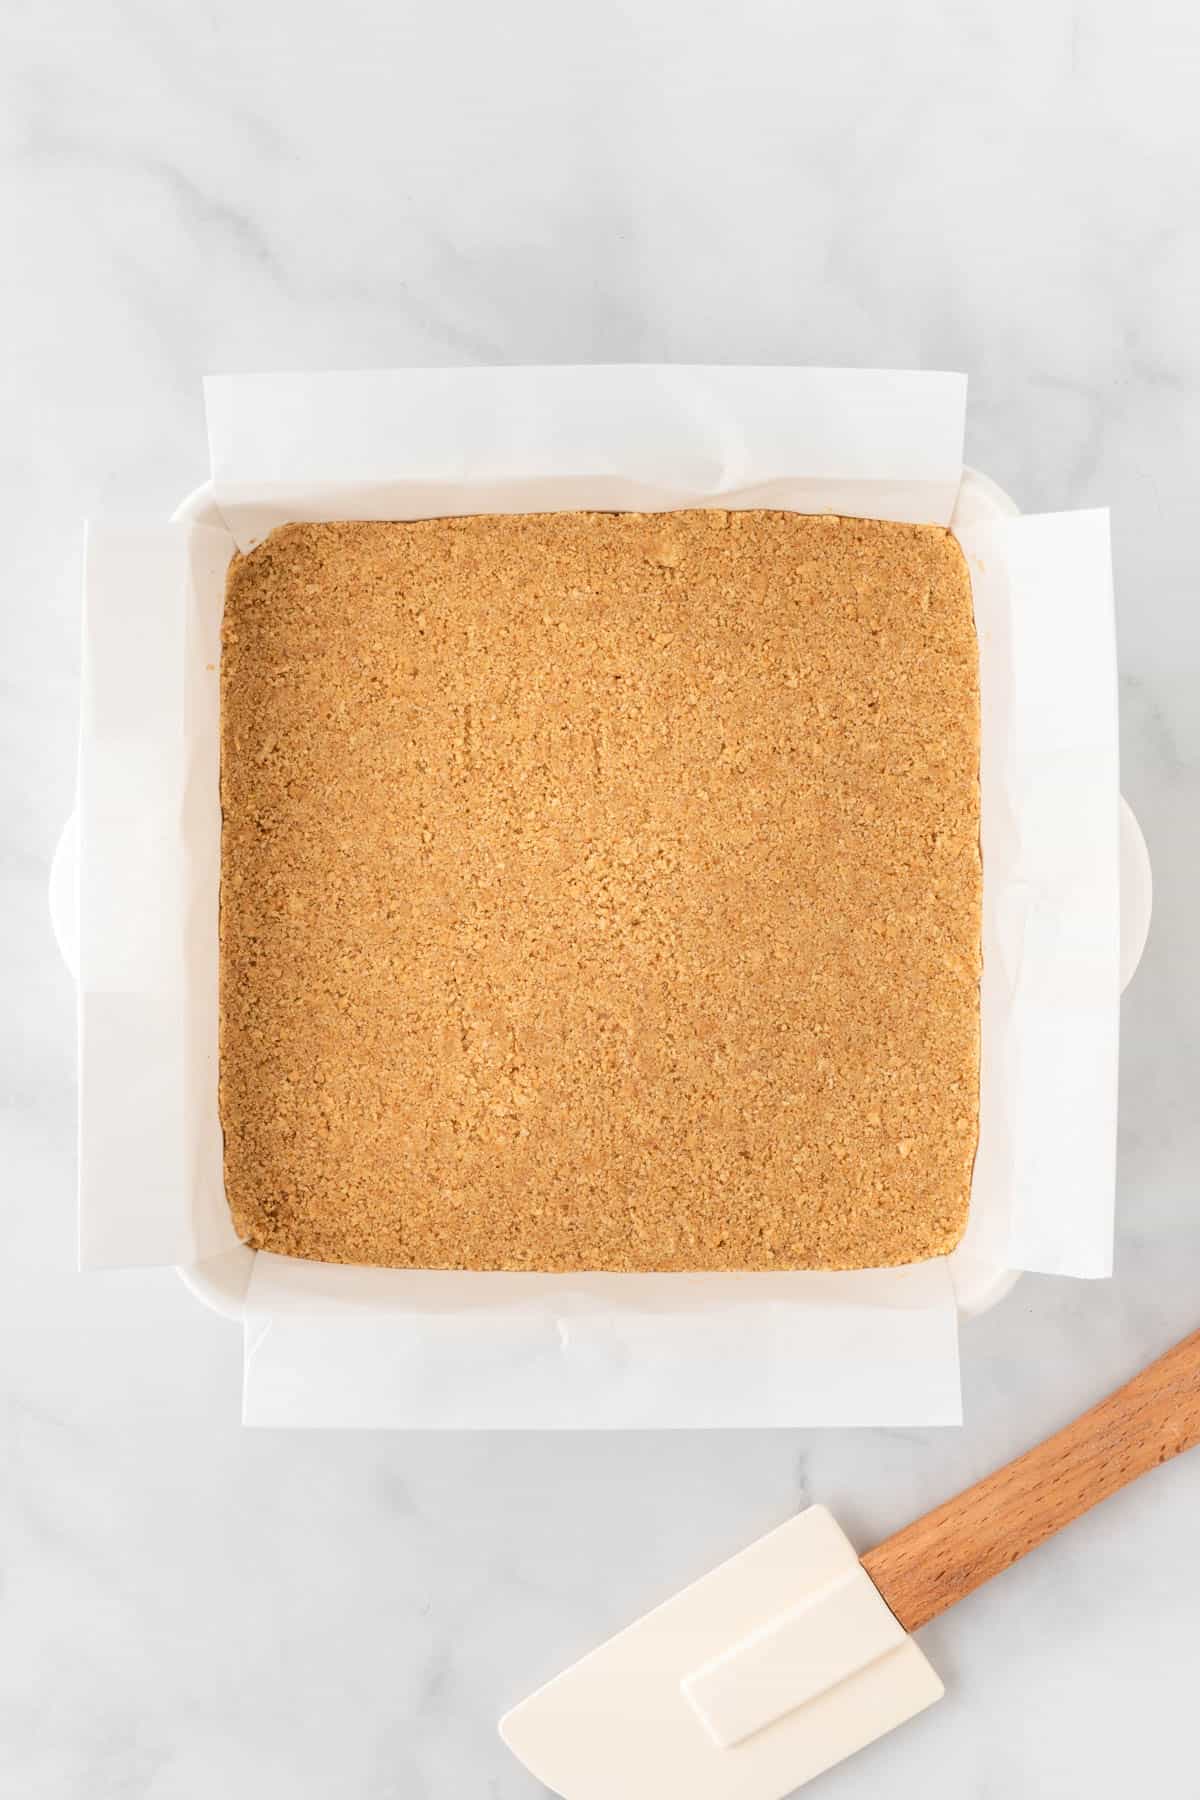 baking dish with graham cracker crust in it